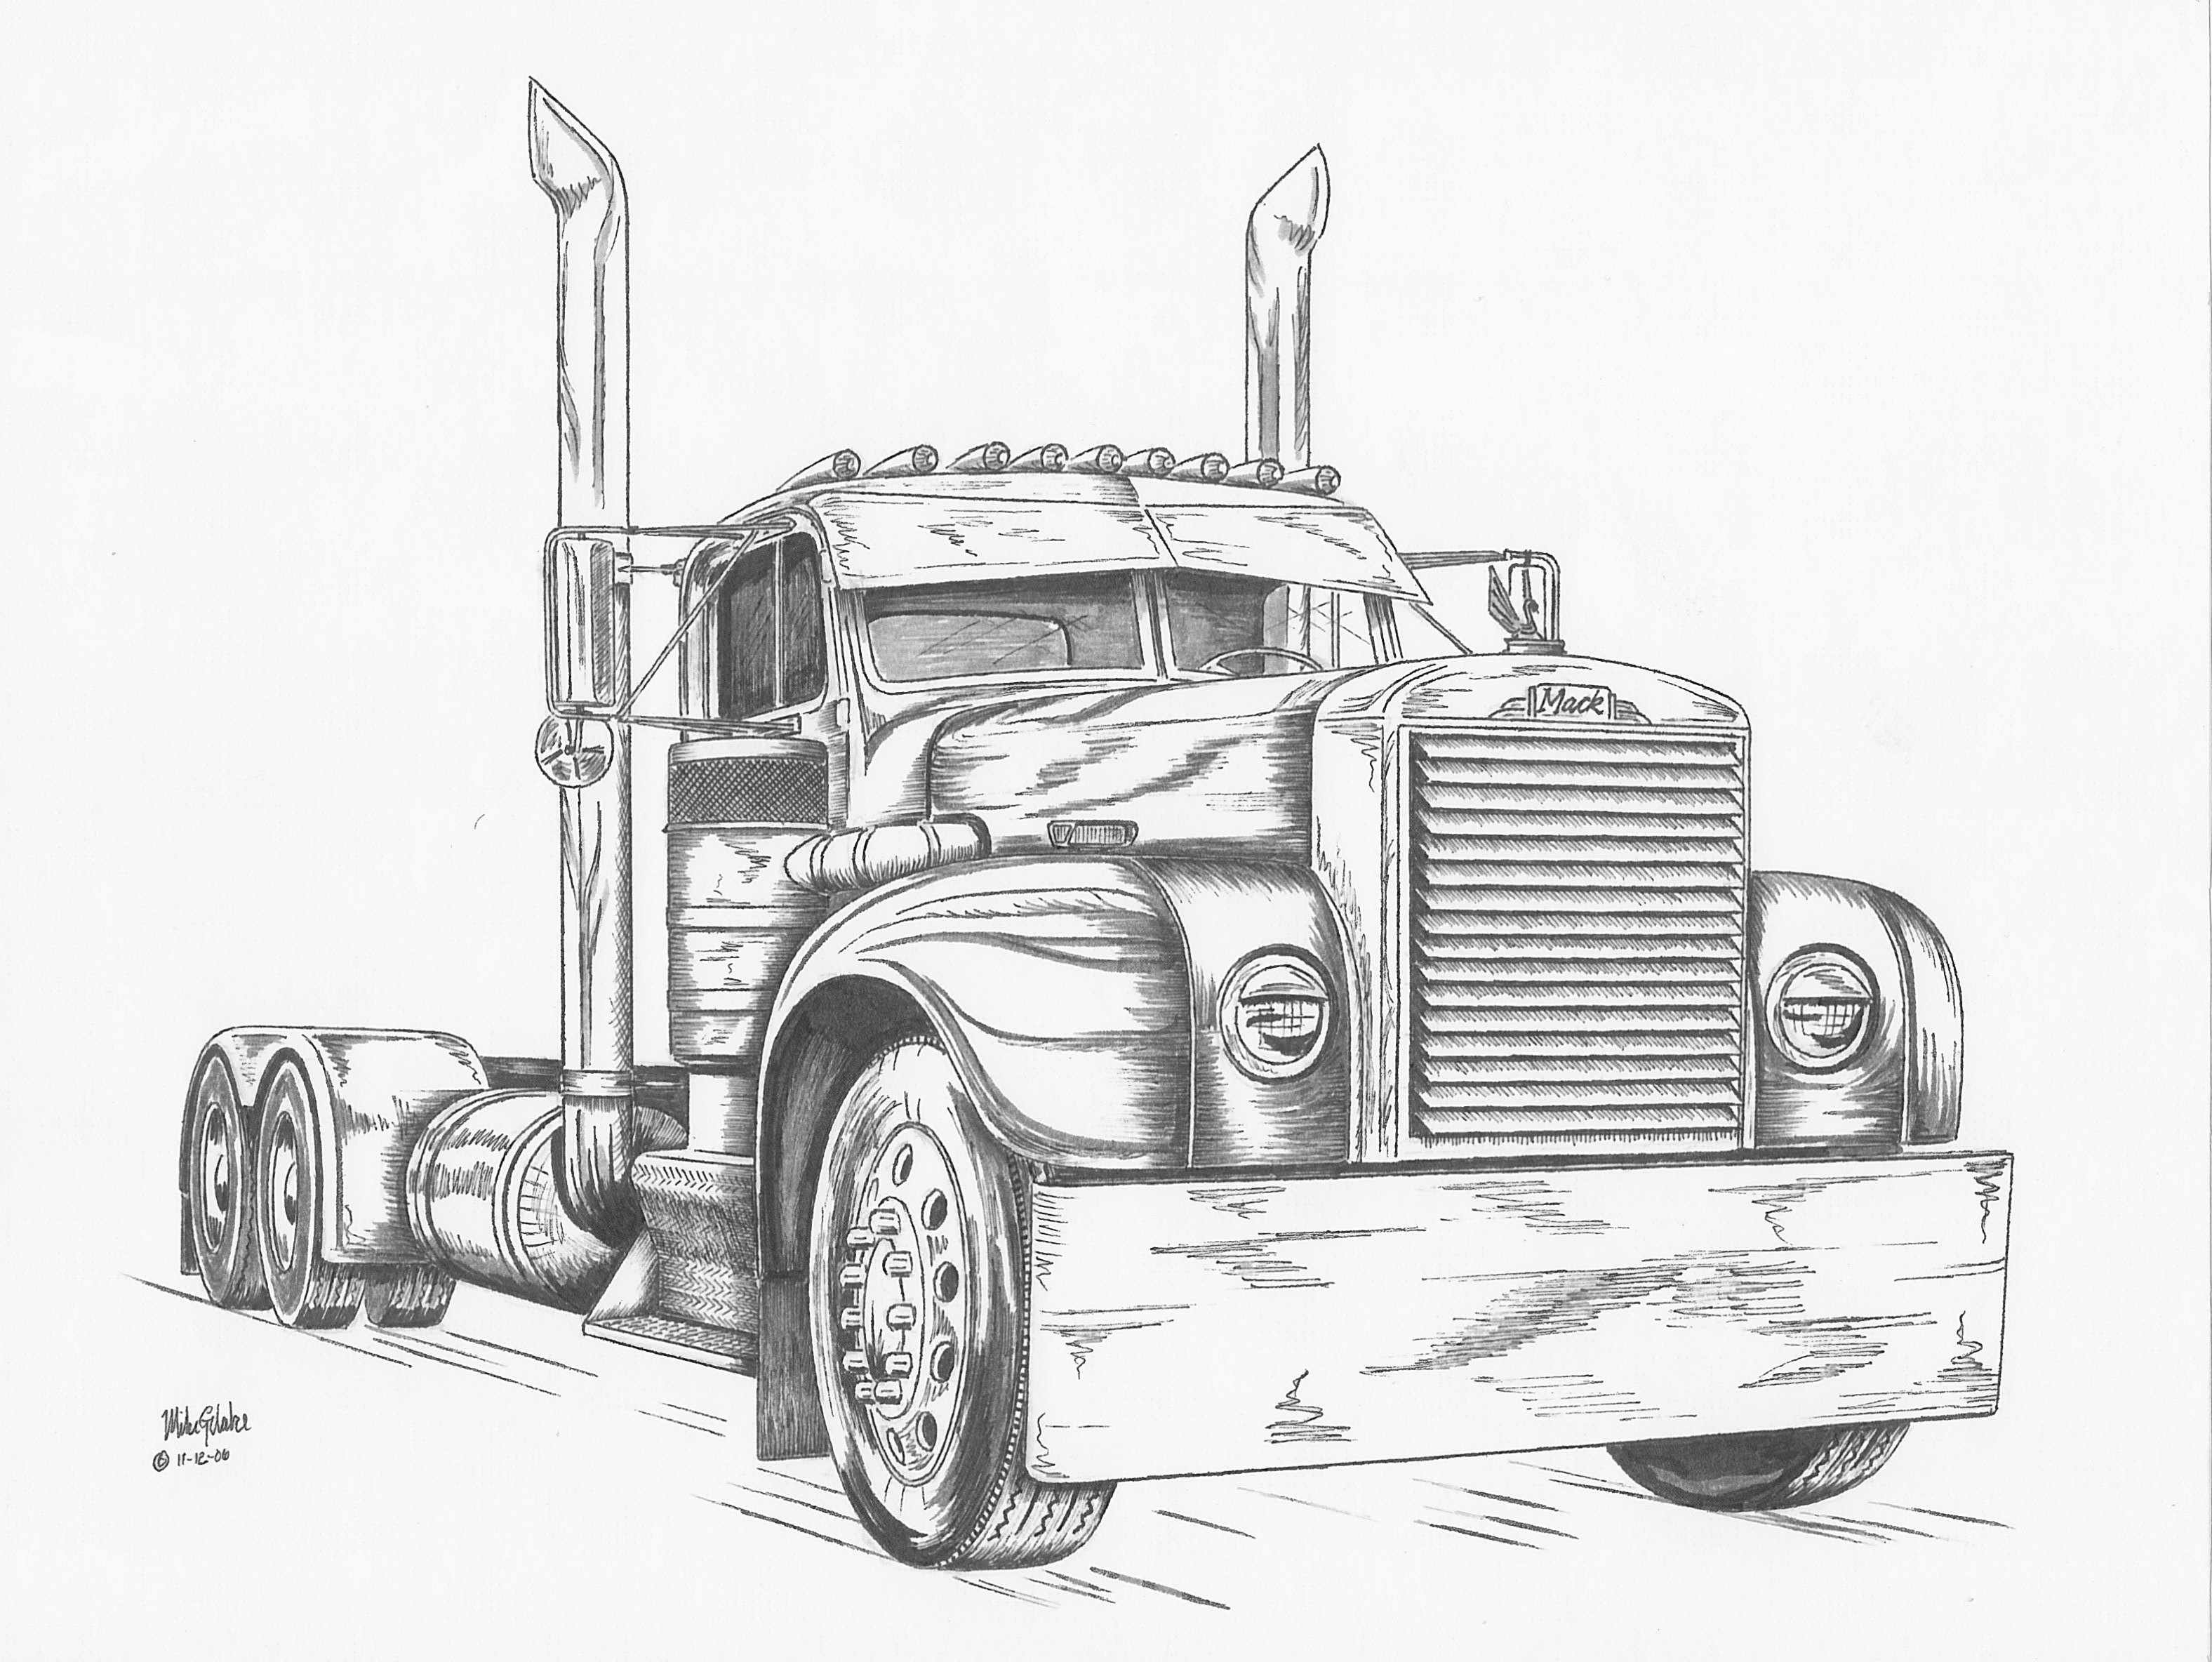 Pen & Ink Art Work - Antique and Classic Mack Trucks General Discussion